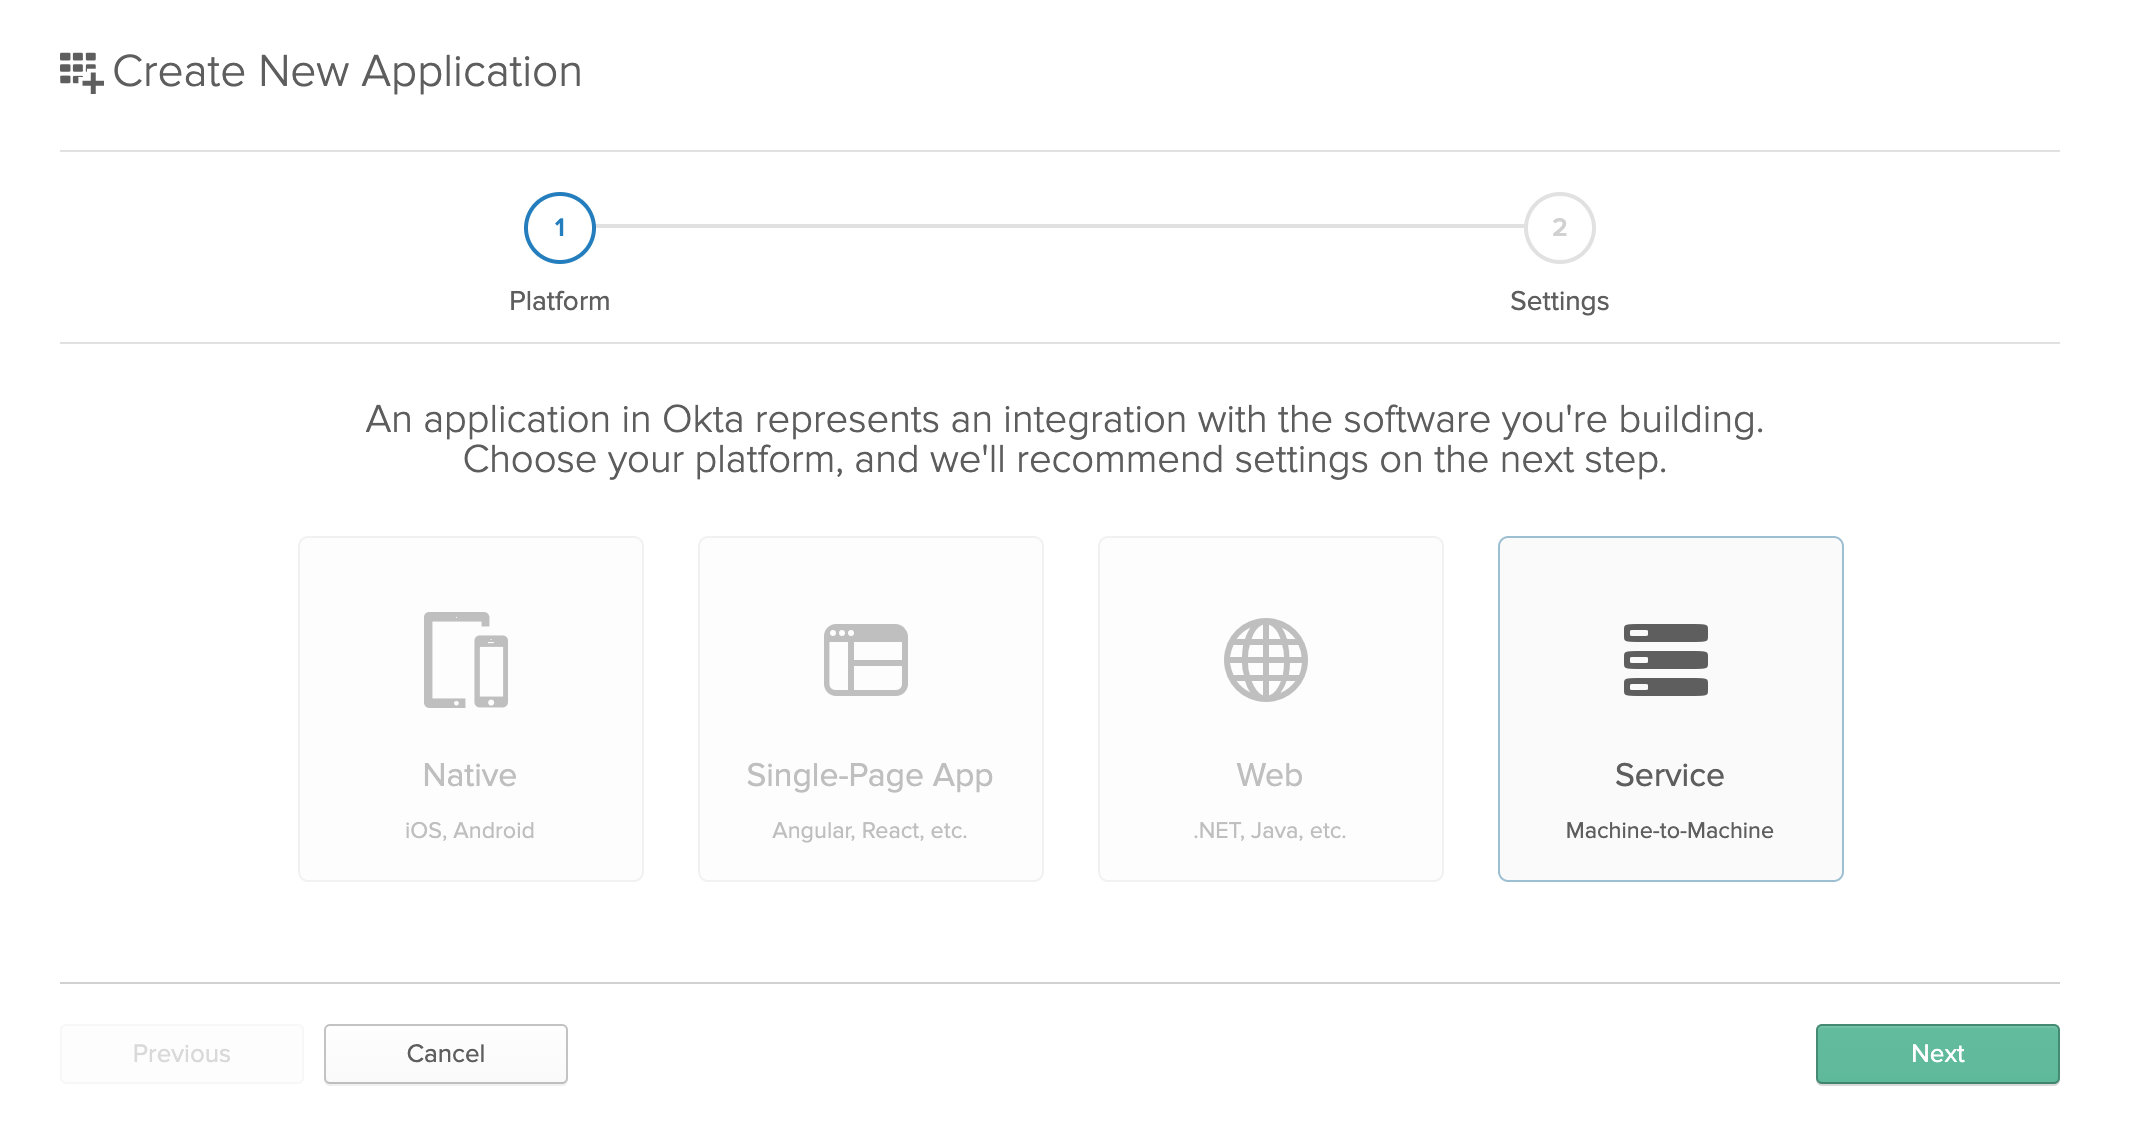 Creating a new service application in Okta